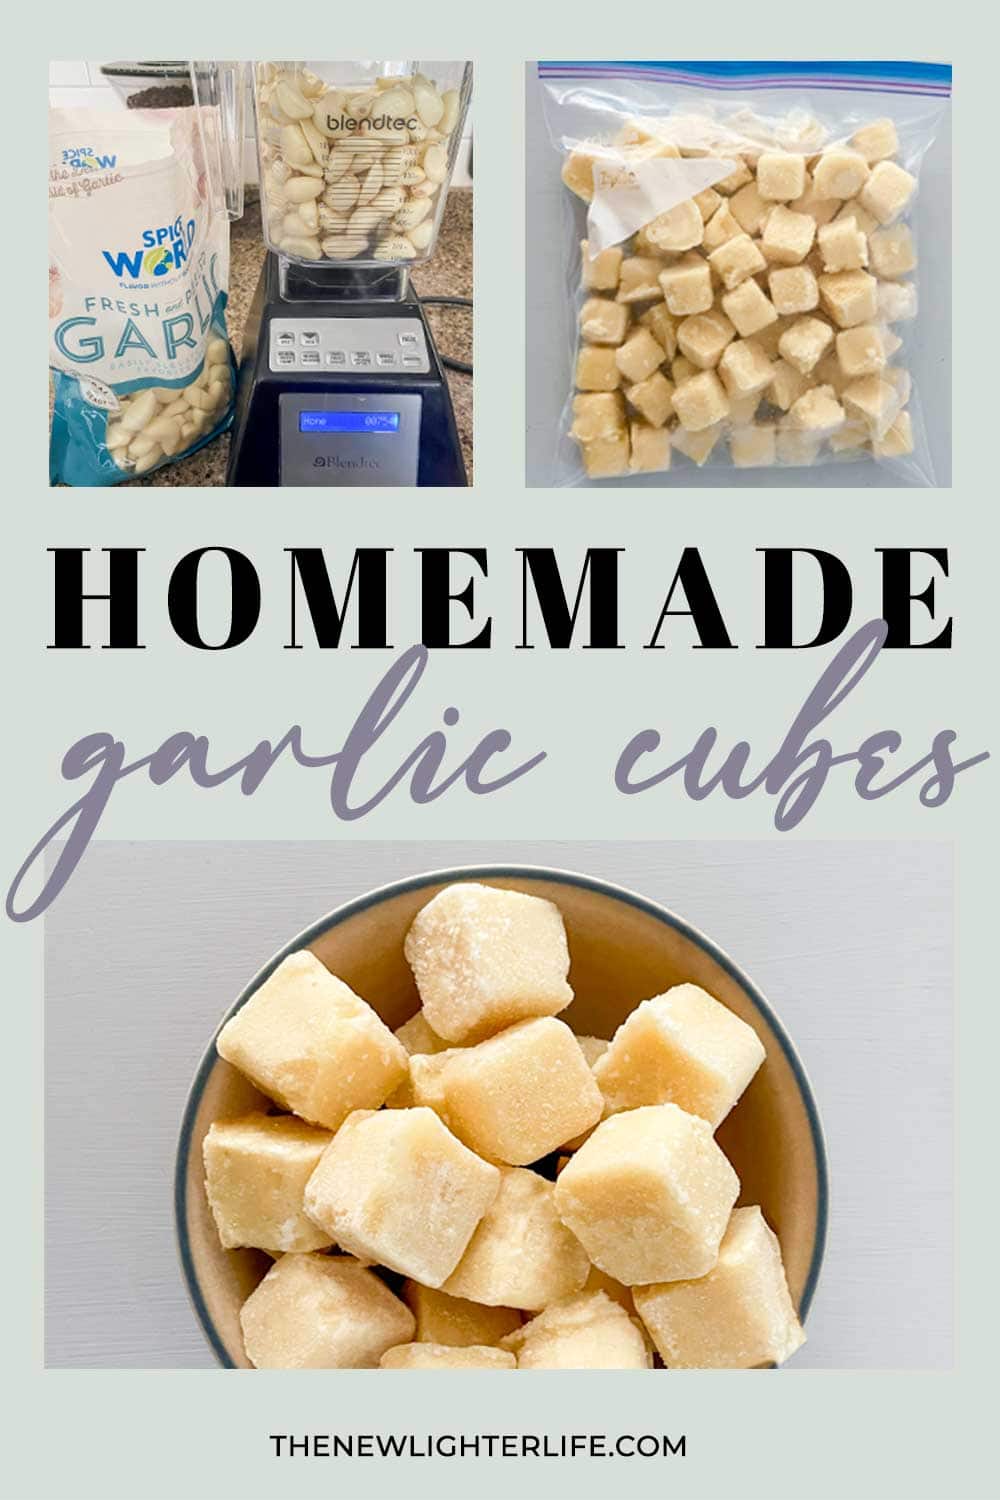 Ginger and Garlic Cubes - How to freeze, store and use